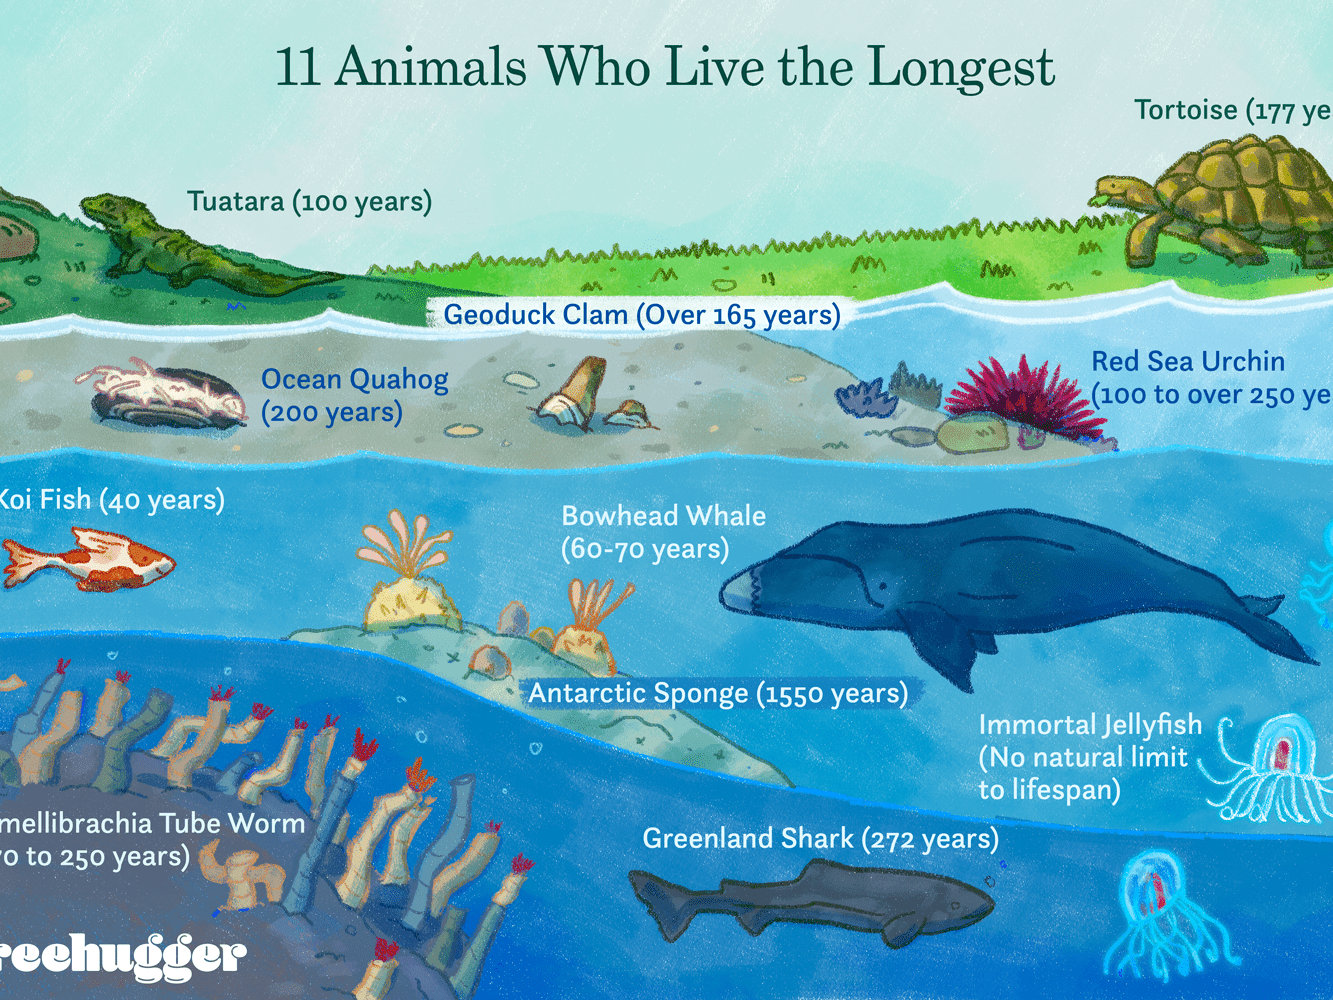 Which animal has the longest lifespan?